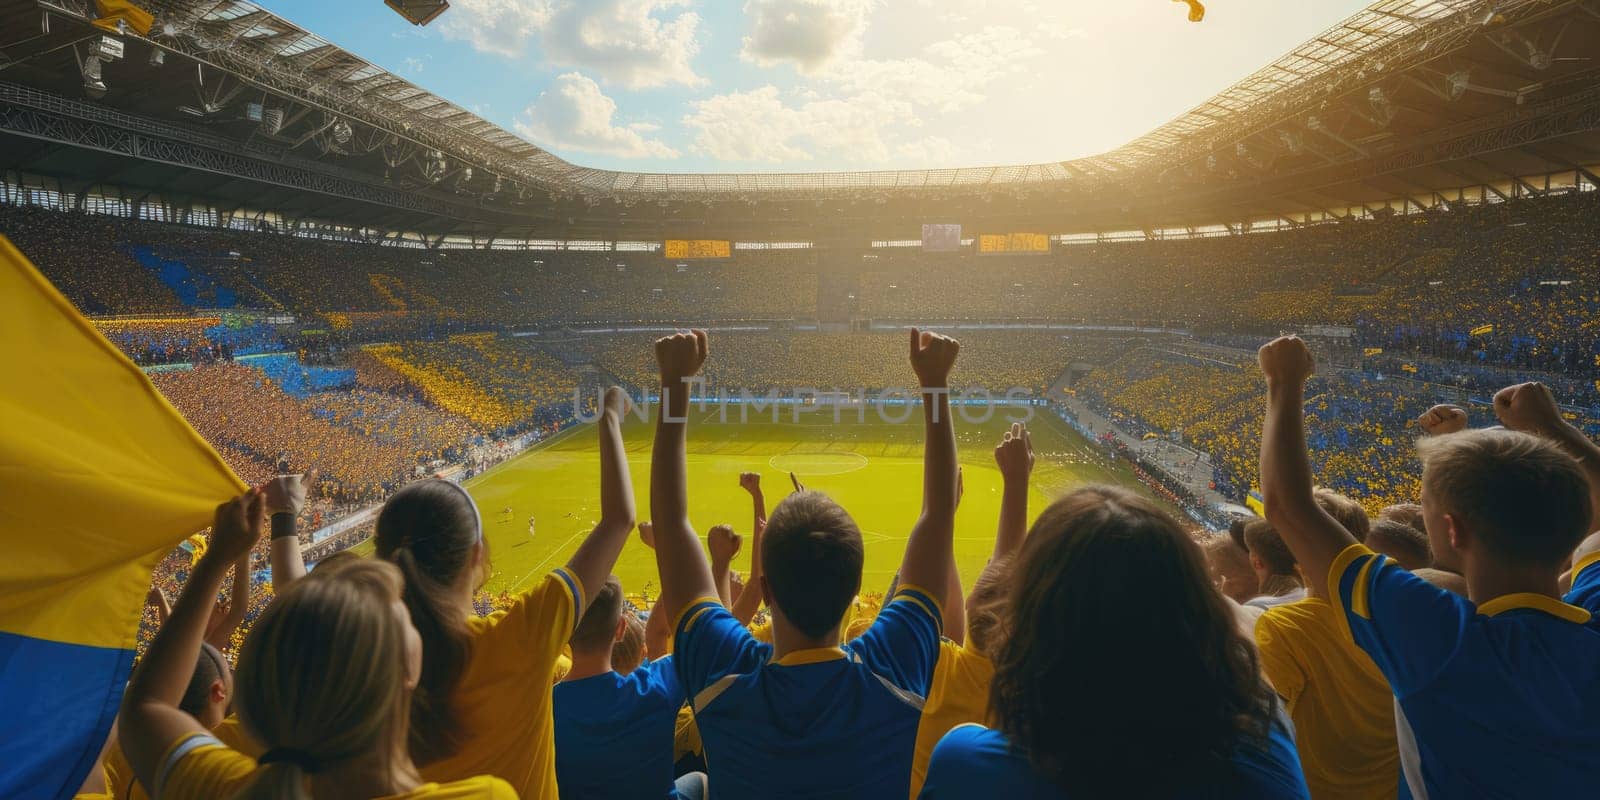 A man in a yellow shirt is standing in a stadium with his arms in the air AIG41 by biancoblue